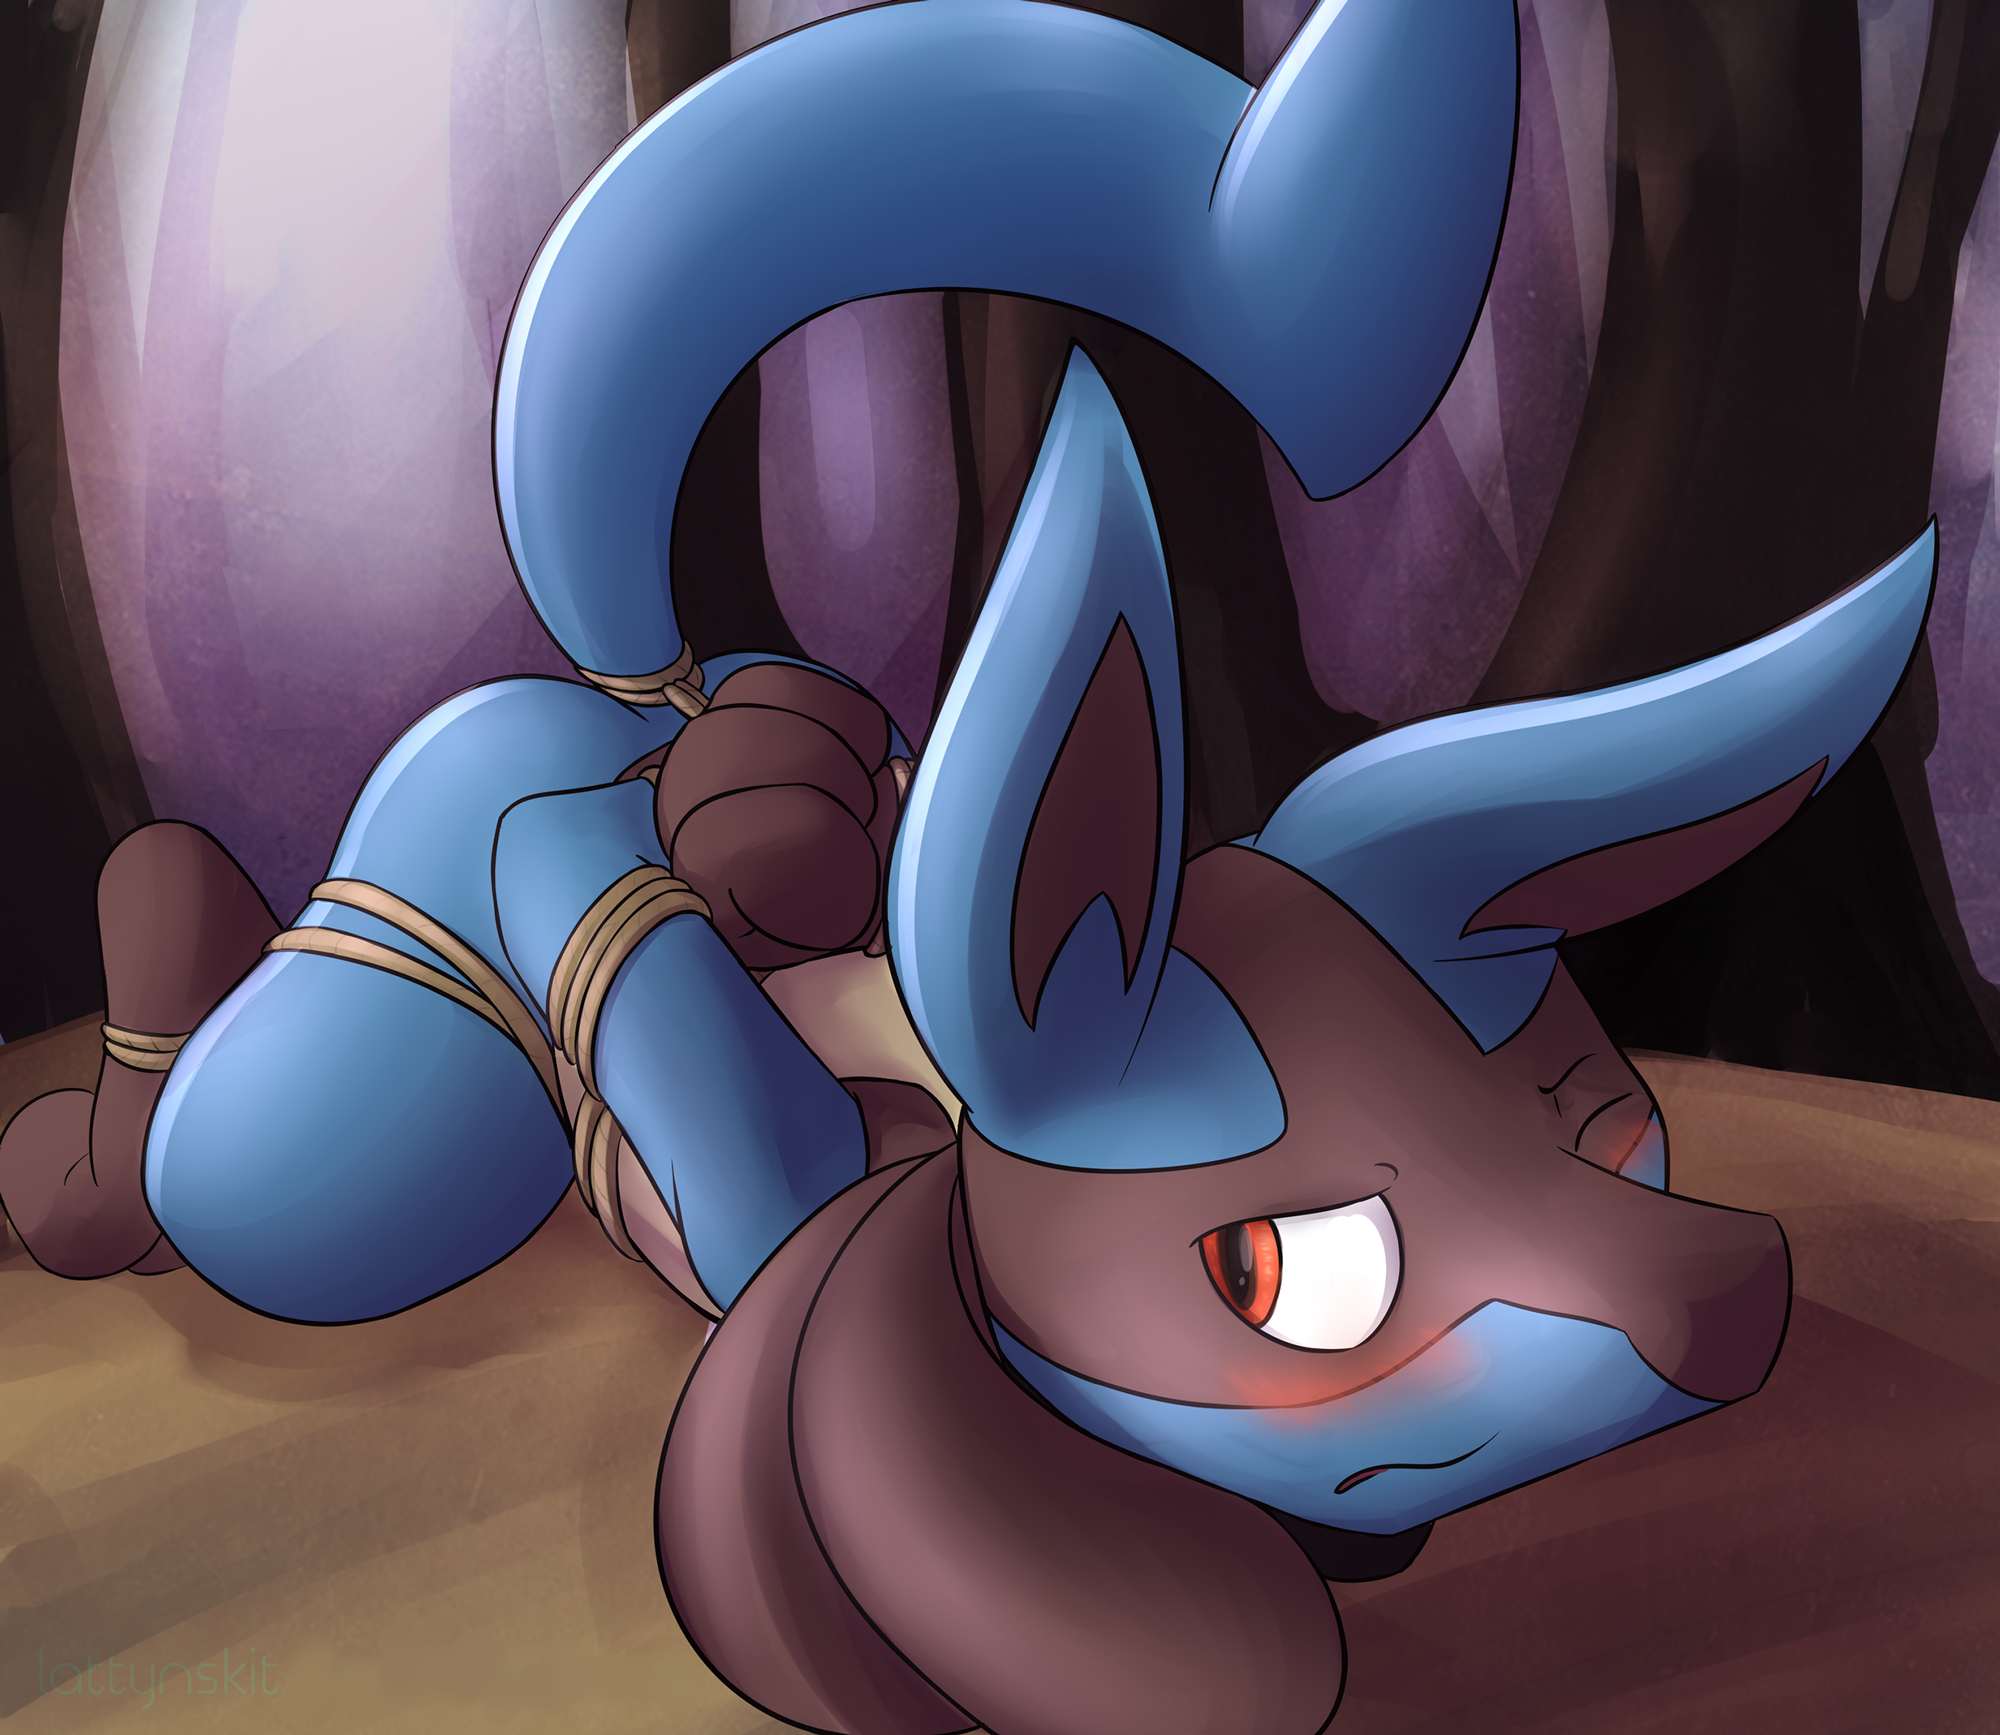 A Captured Lucario Appeared. 